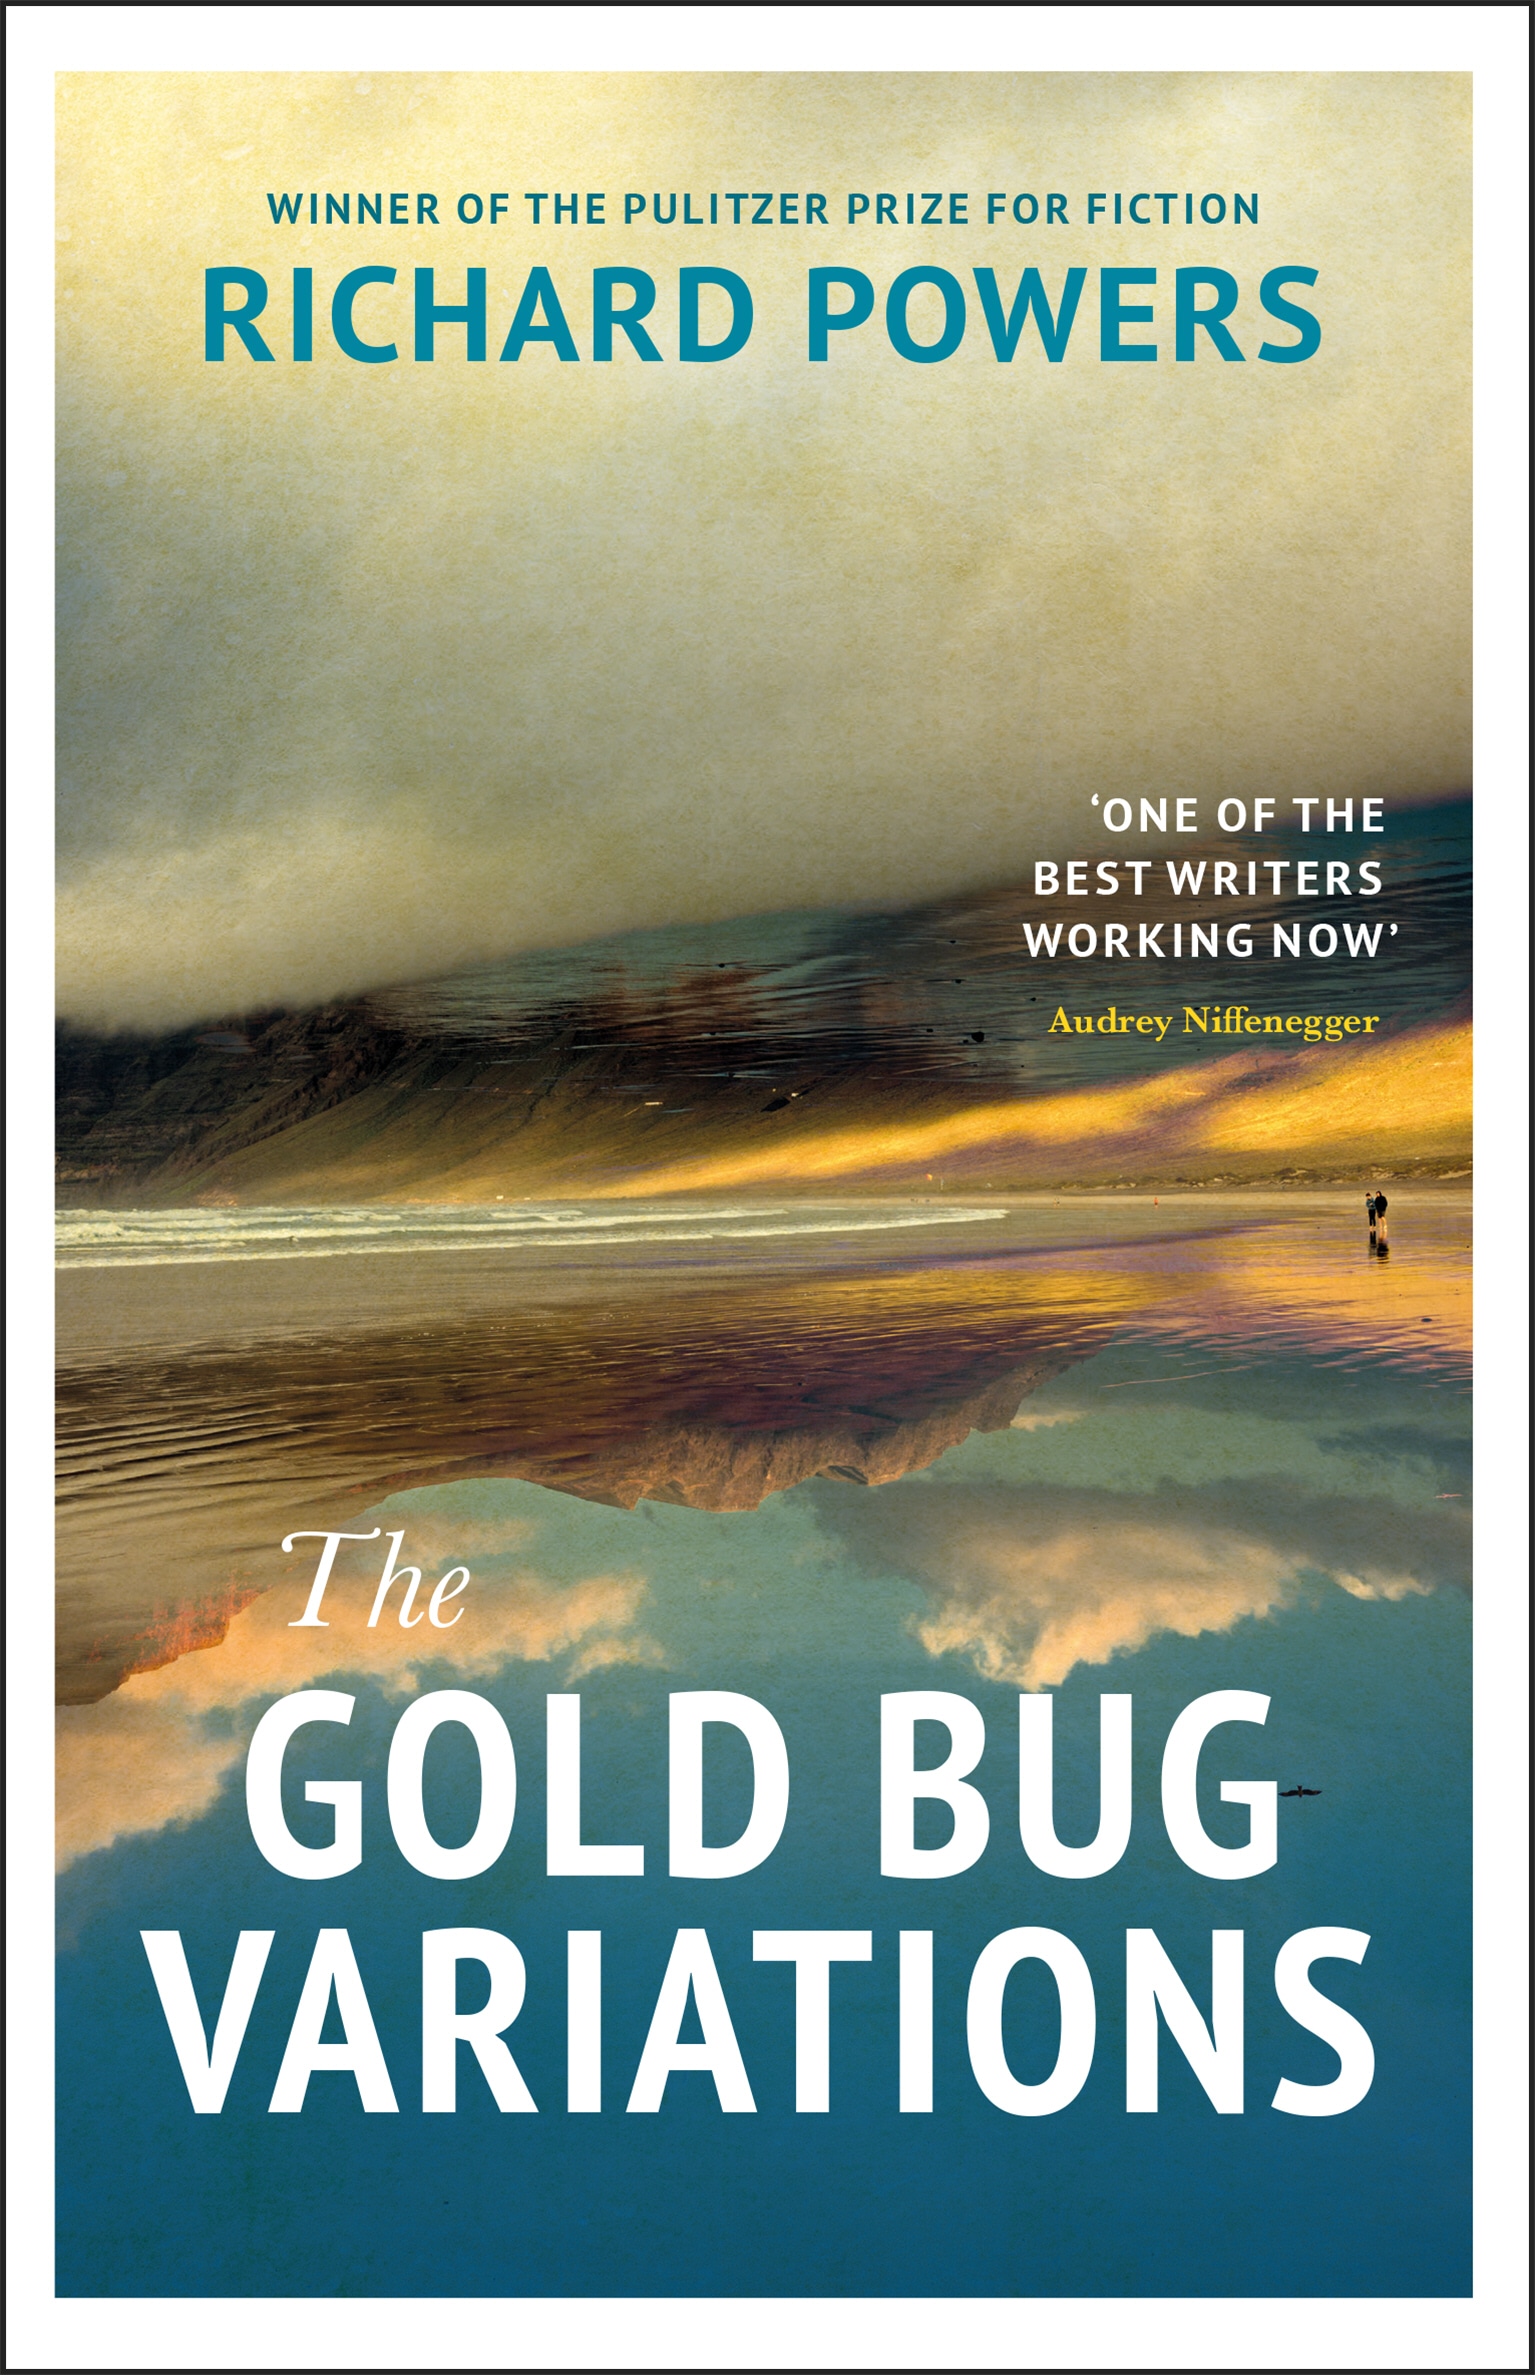 Book “The Gold Bug Variations” by Richard Powers — November 7, 2019